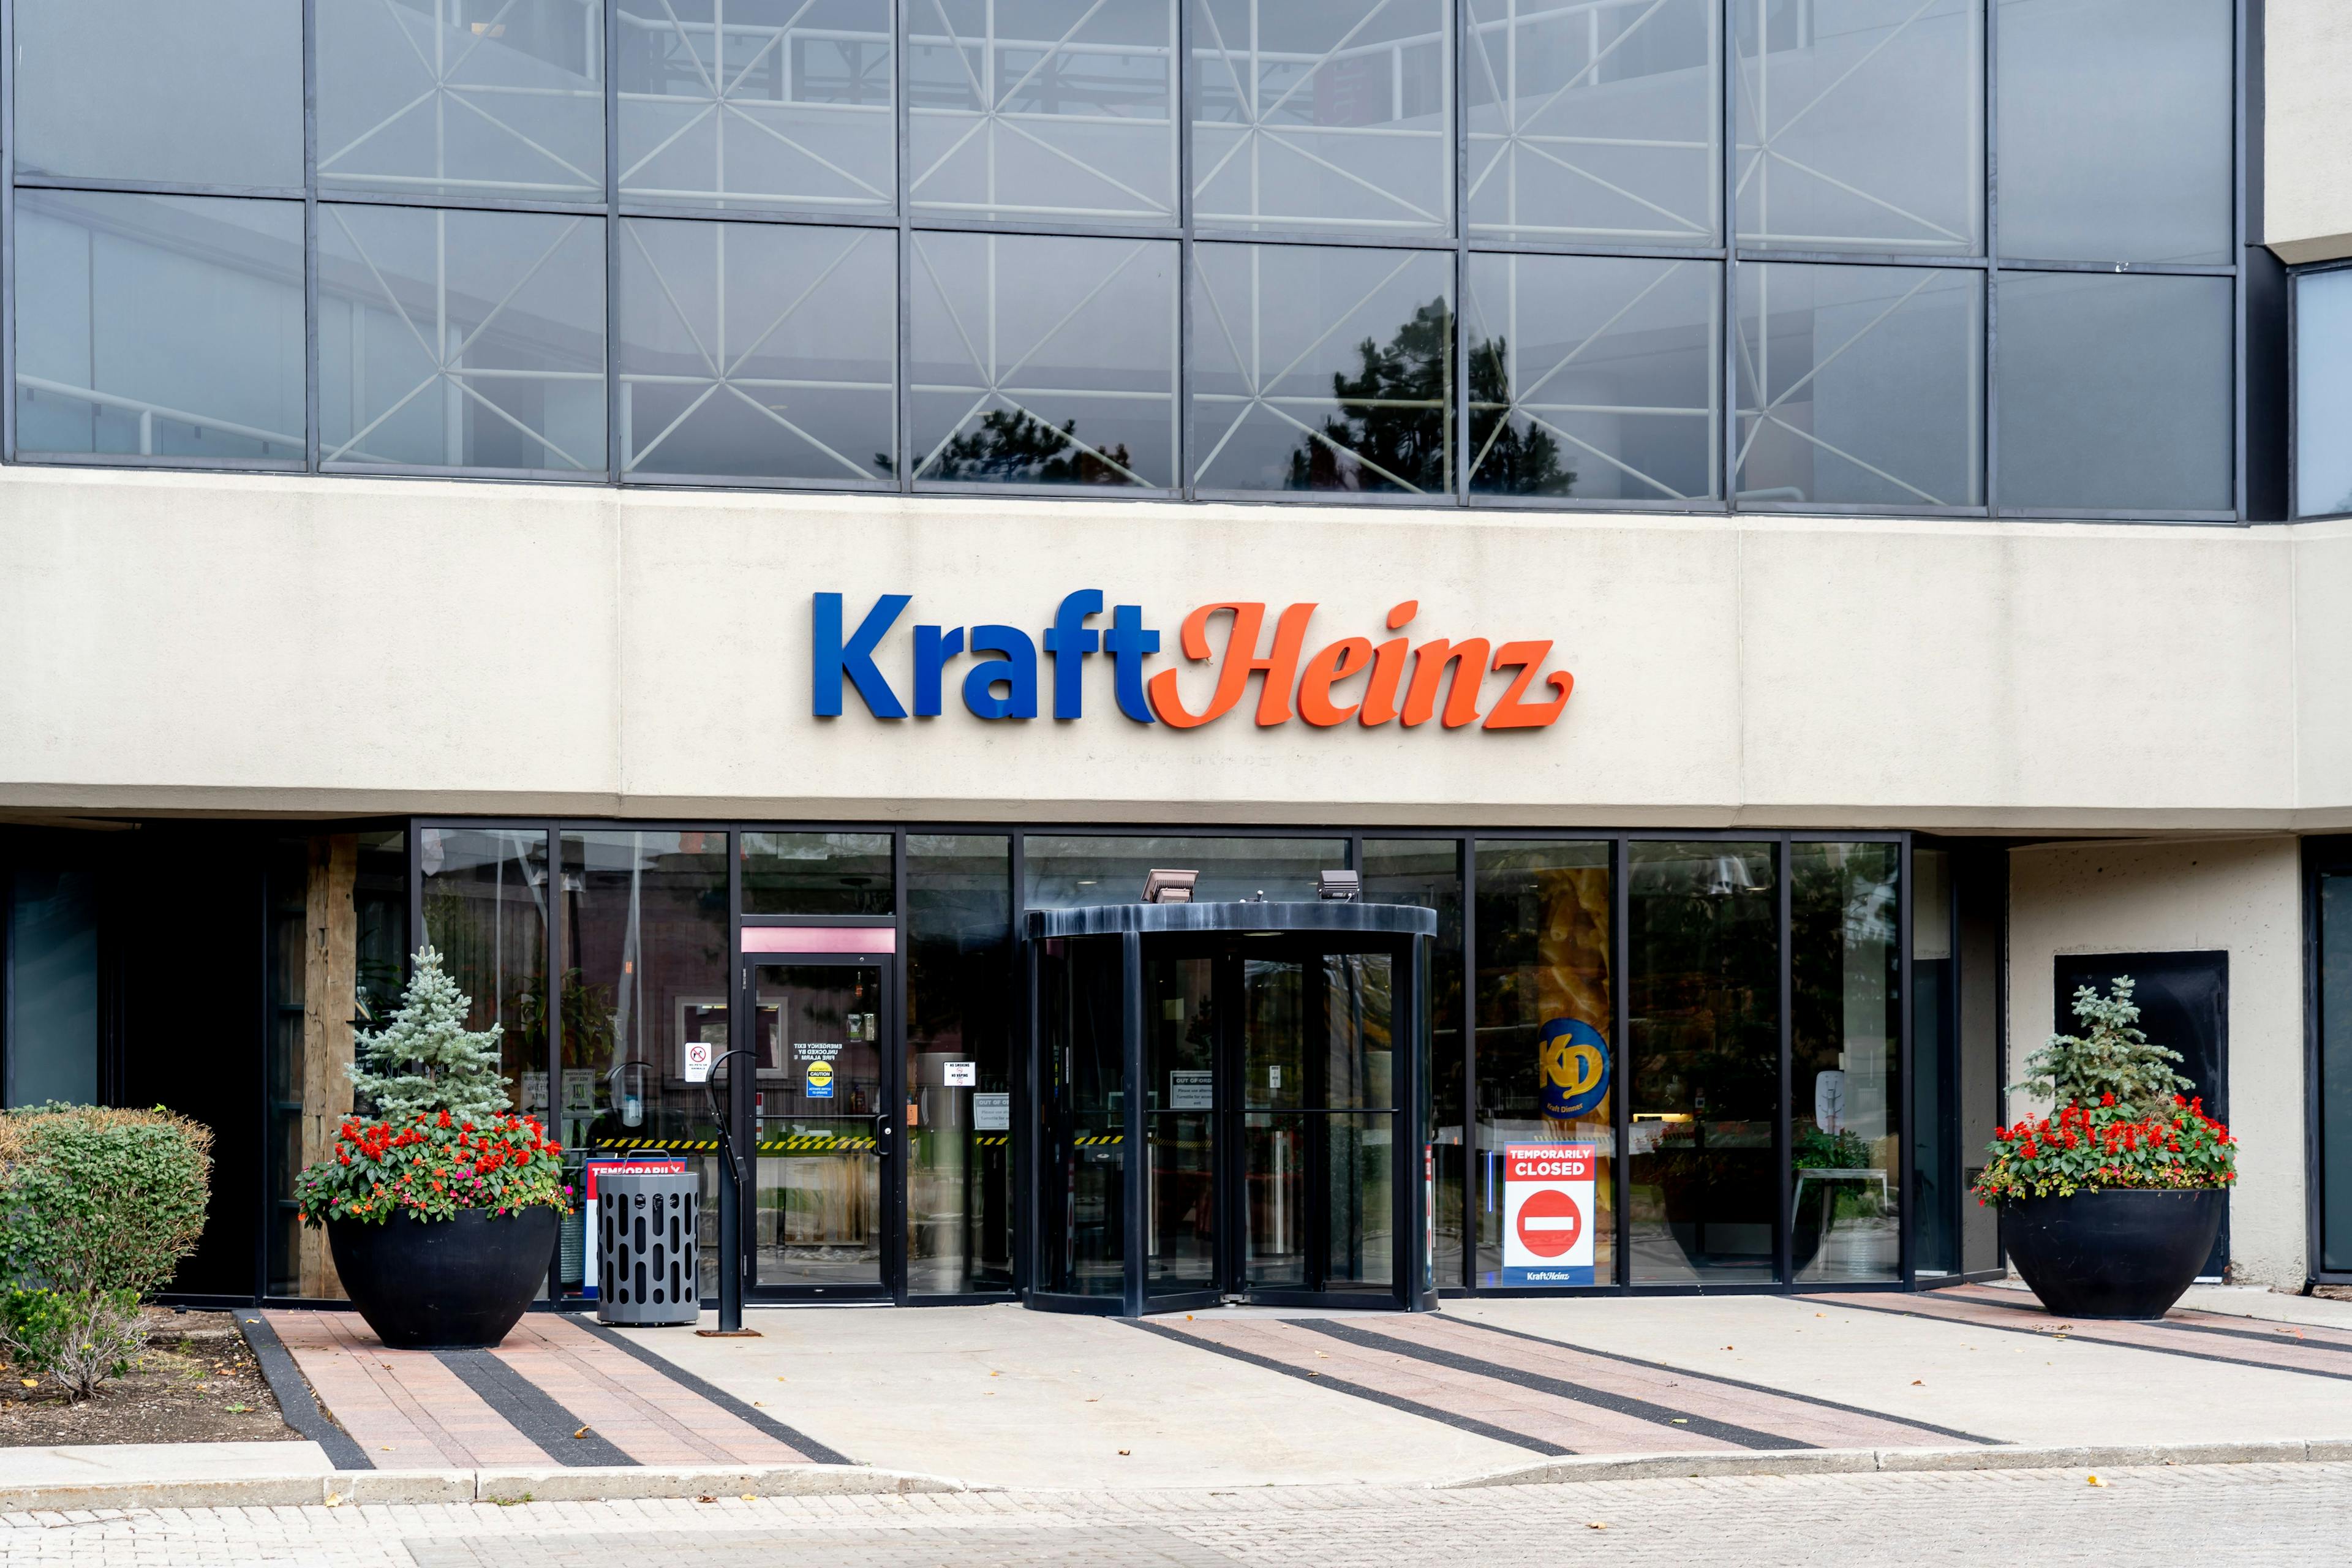 A building entrance marked with the Kraft Heinz logo above the doors.